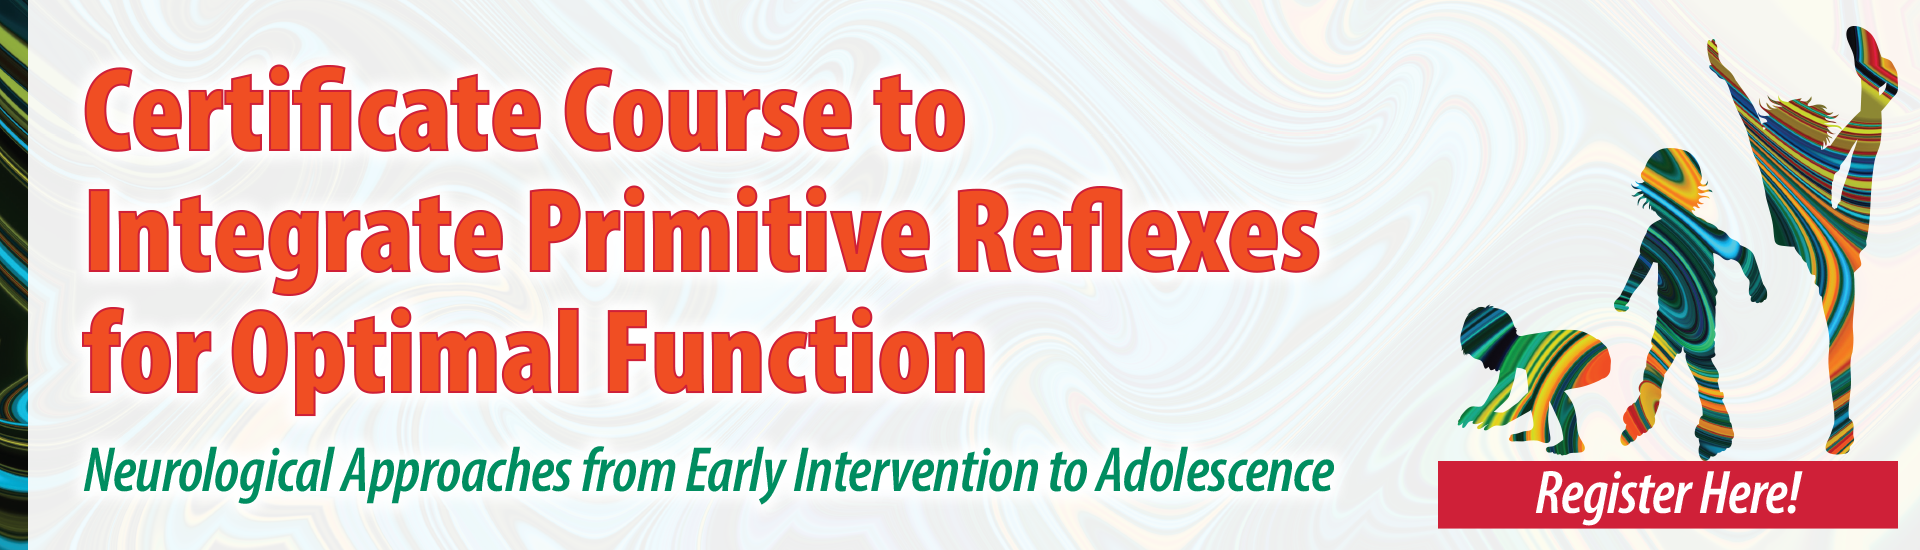 Certificate Course to Integrate Primitive Reflexes for Optimal Function: Neurological Approaches from Early Intervention to Adolescence